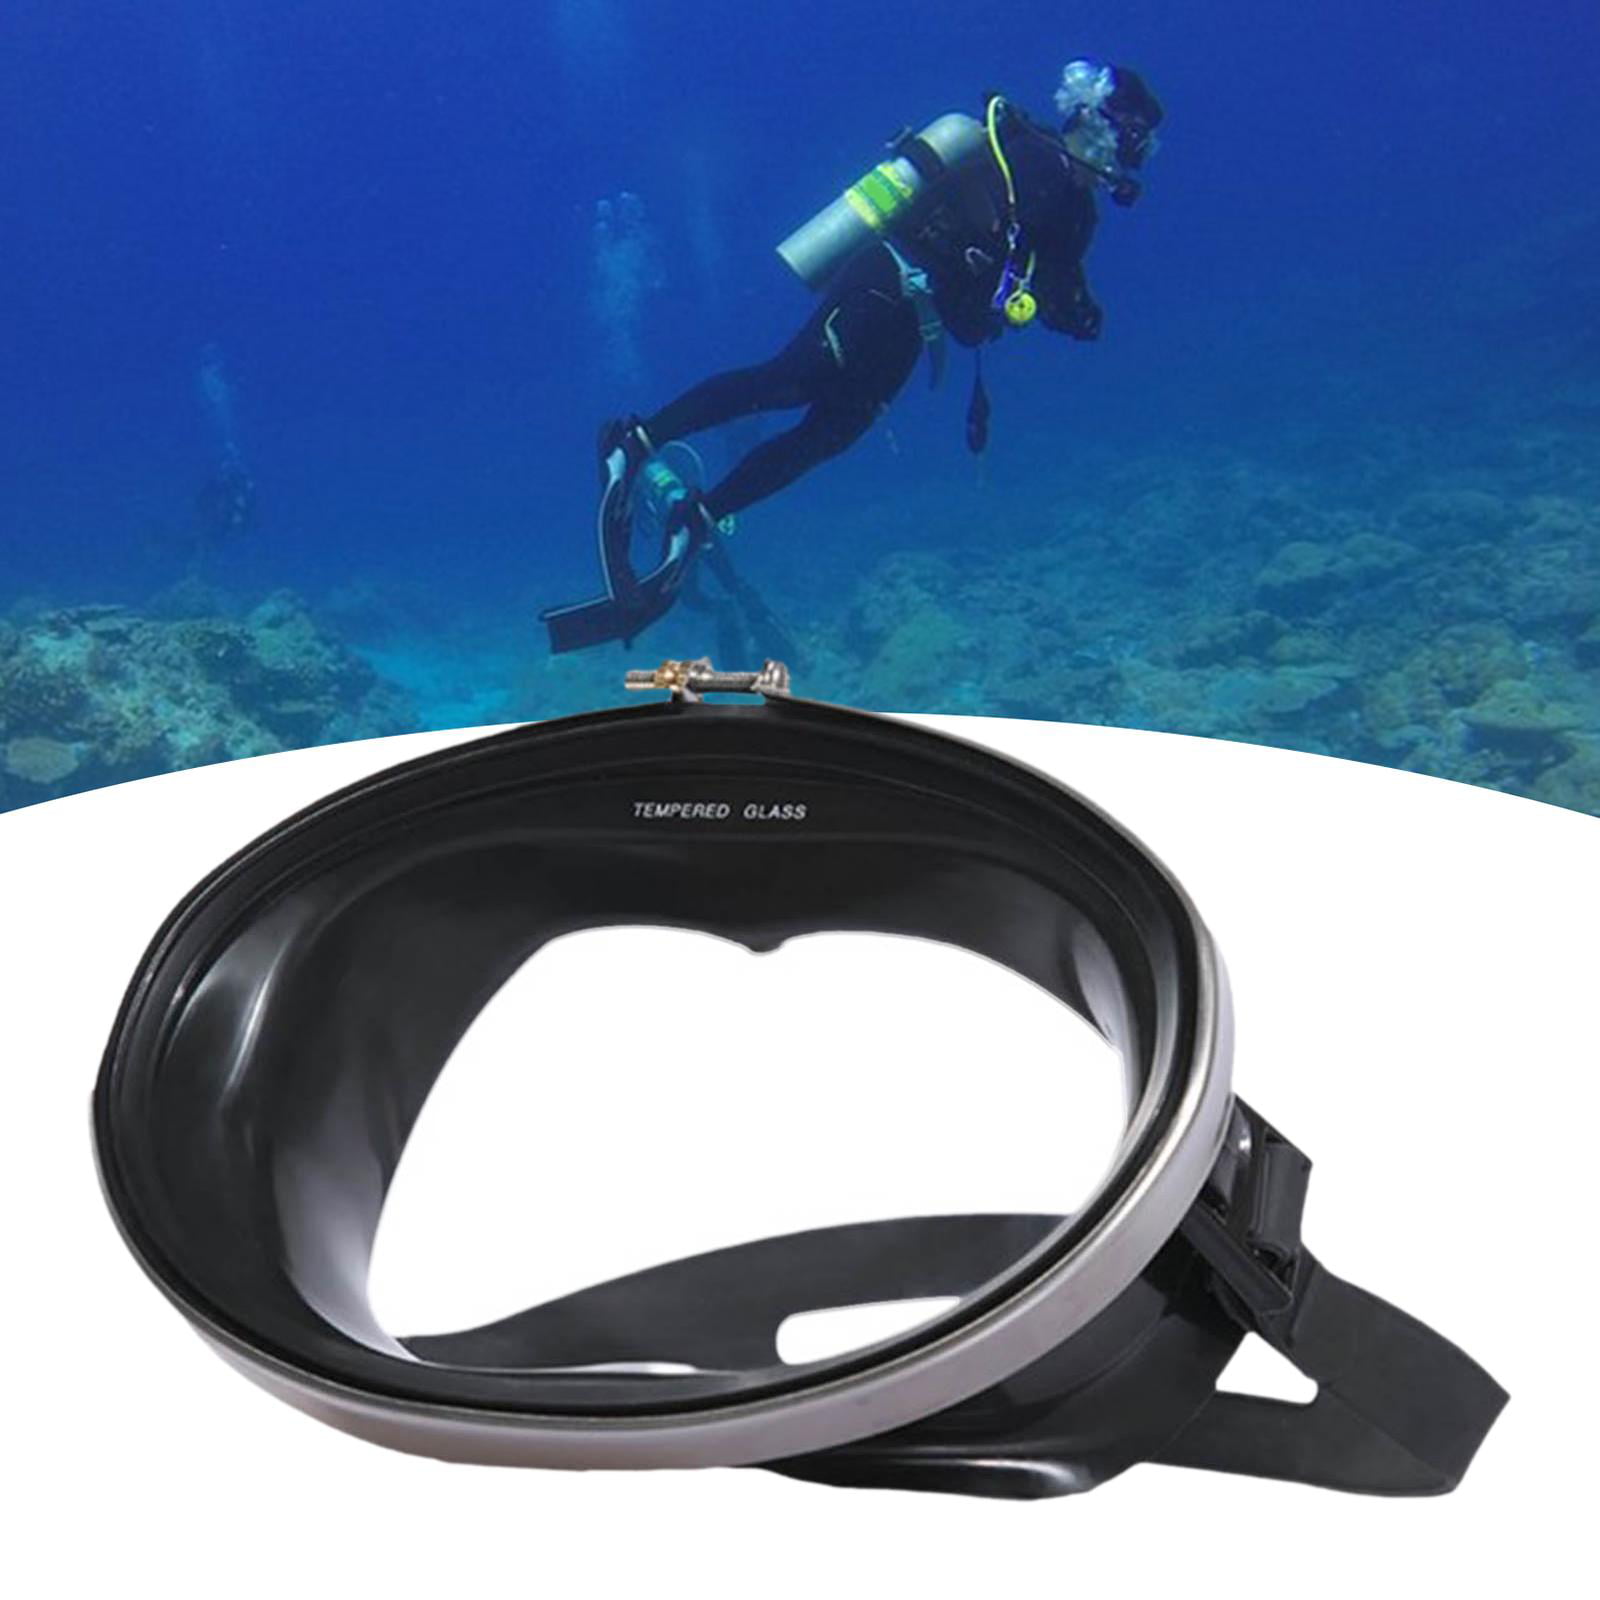 Classic Oval Dive Mask-Comfort Fit-Fog Free Tempered Glass Retro Single Lens 